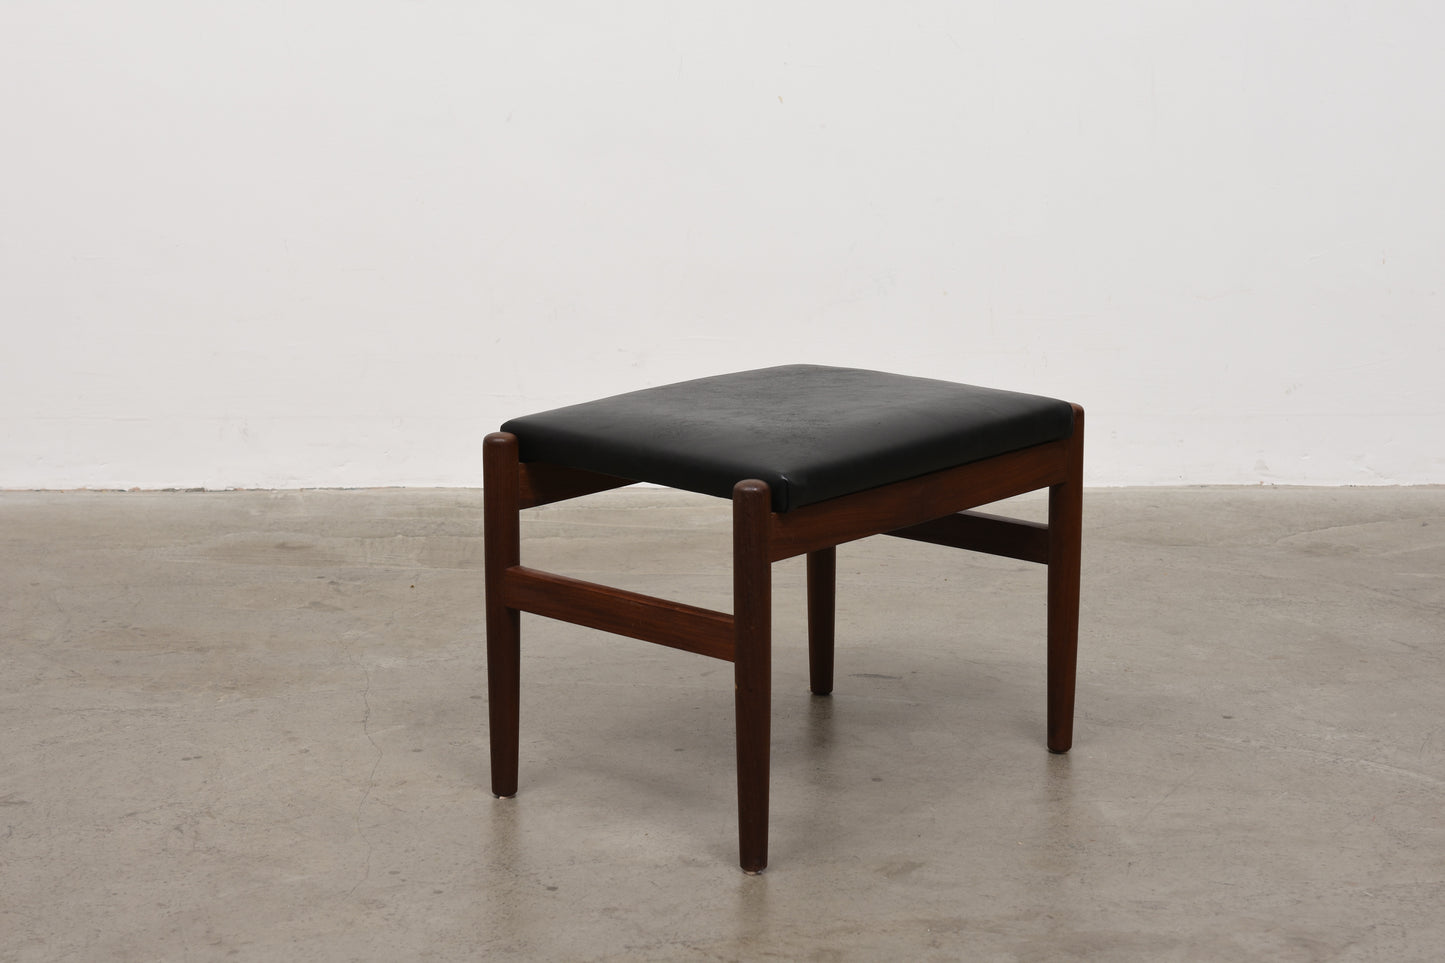 Teak + leather foot stool by Spotterup